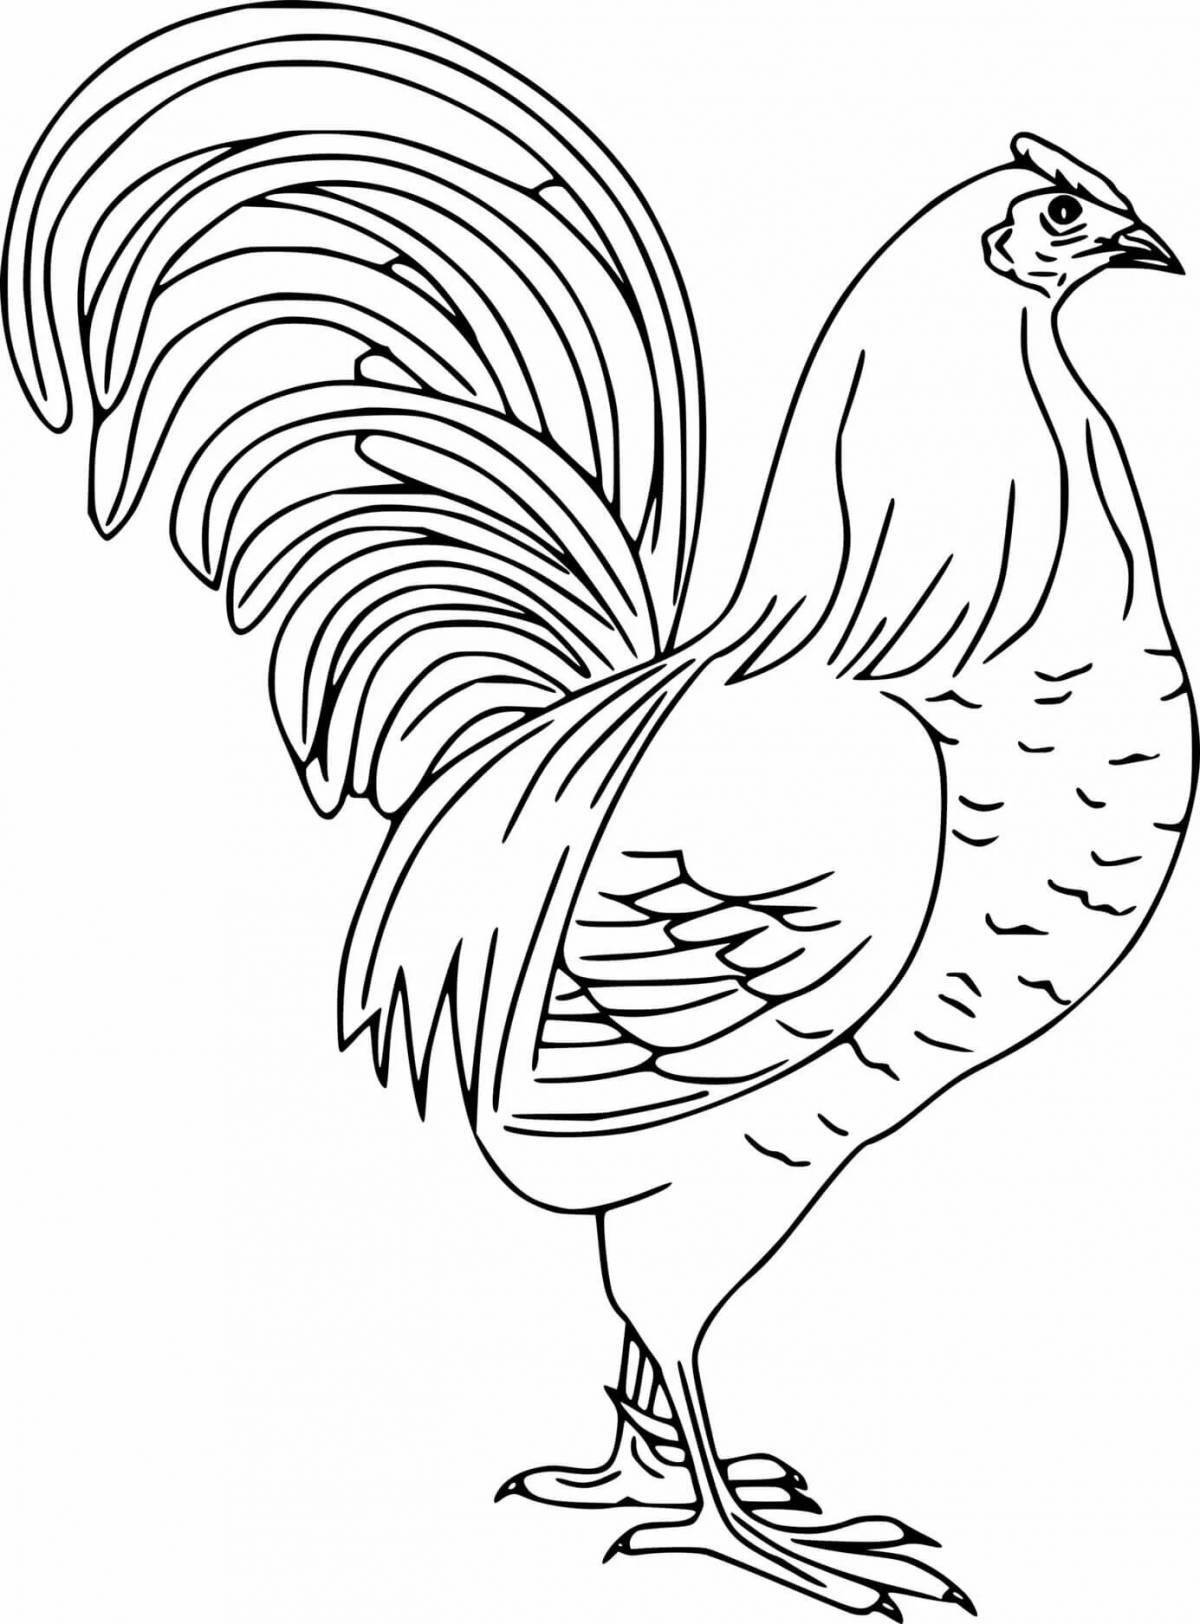 Cub coloring page